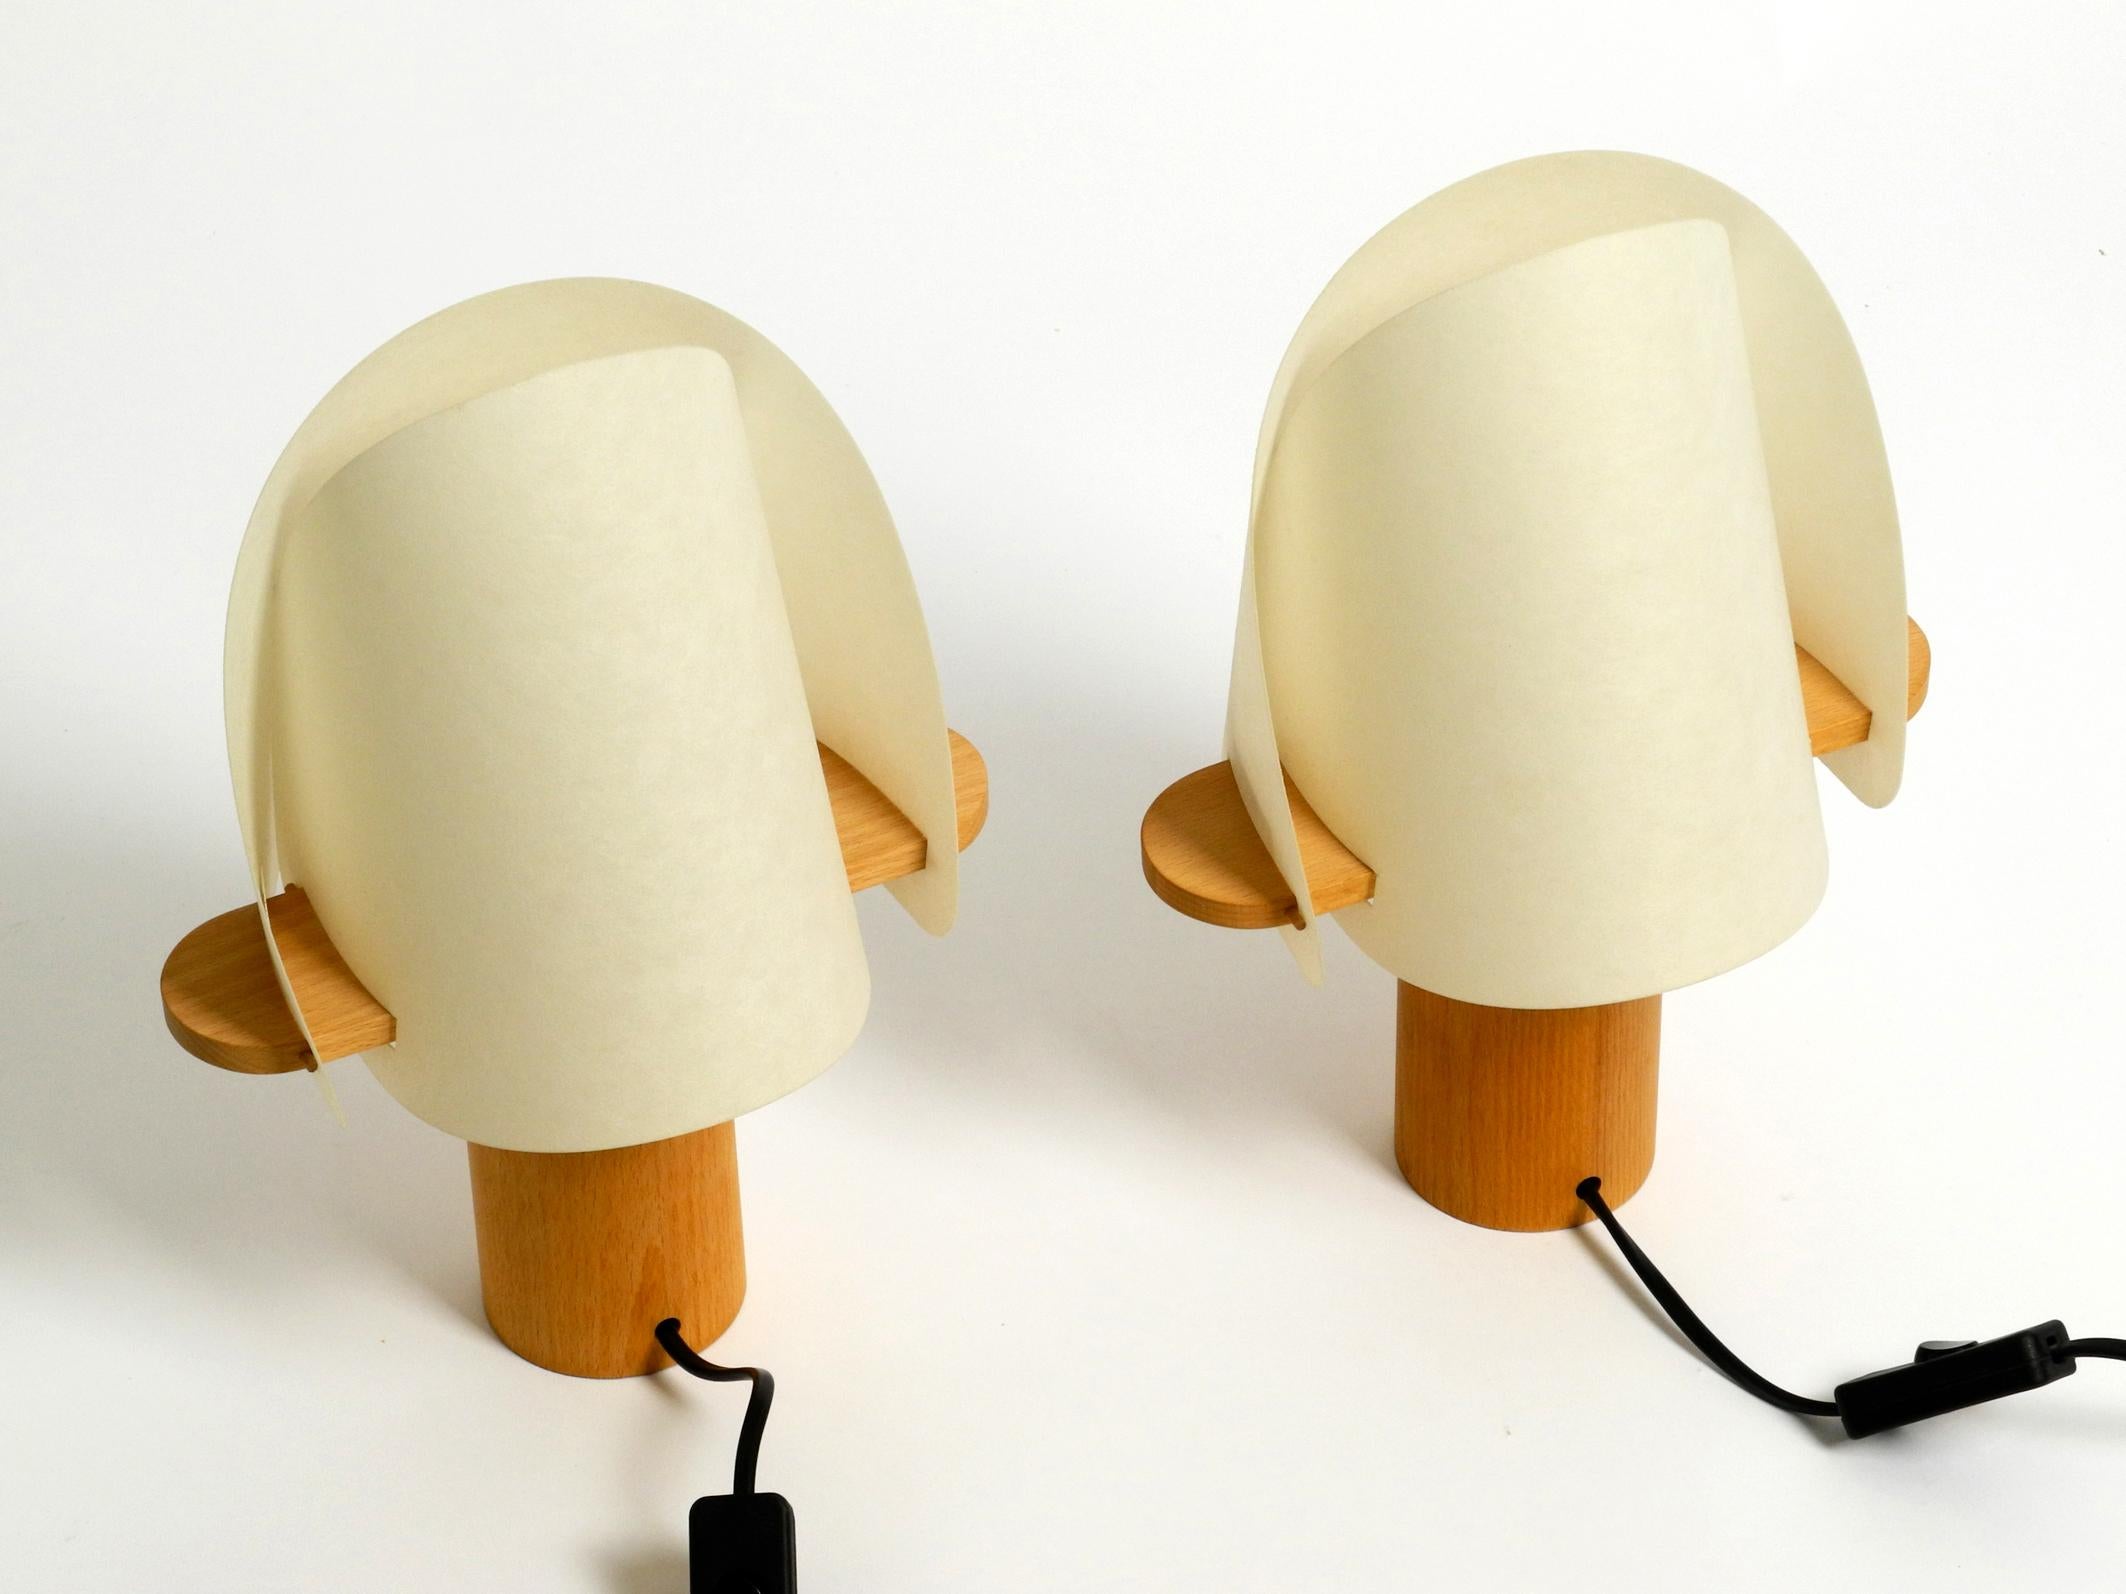 Late 20th Century Two Charming Minimalistic Oak Table Lamps with Lunopal Shades by Domus  1980s For Sale